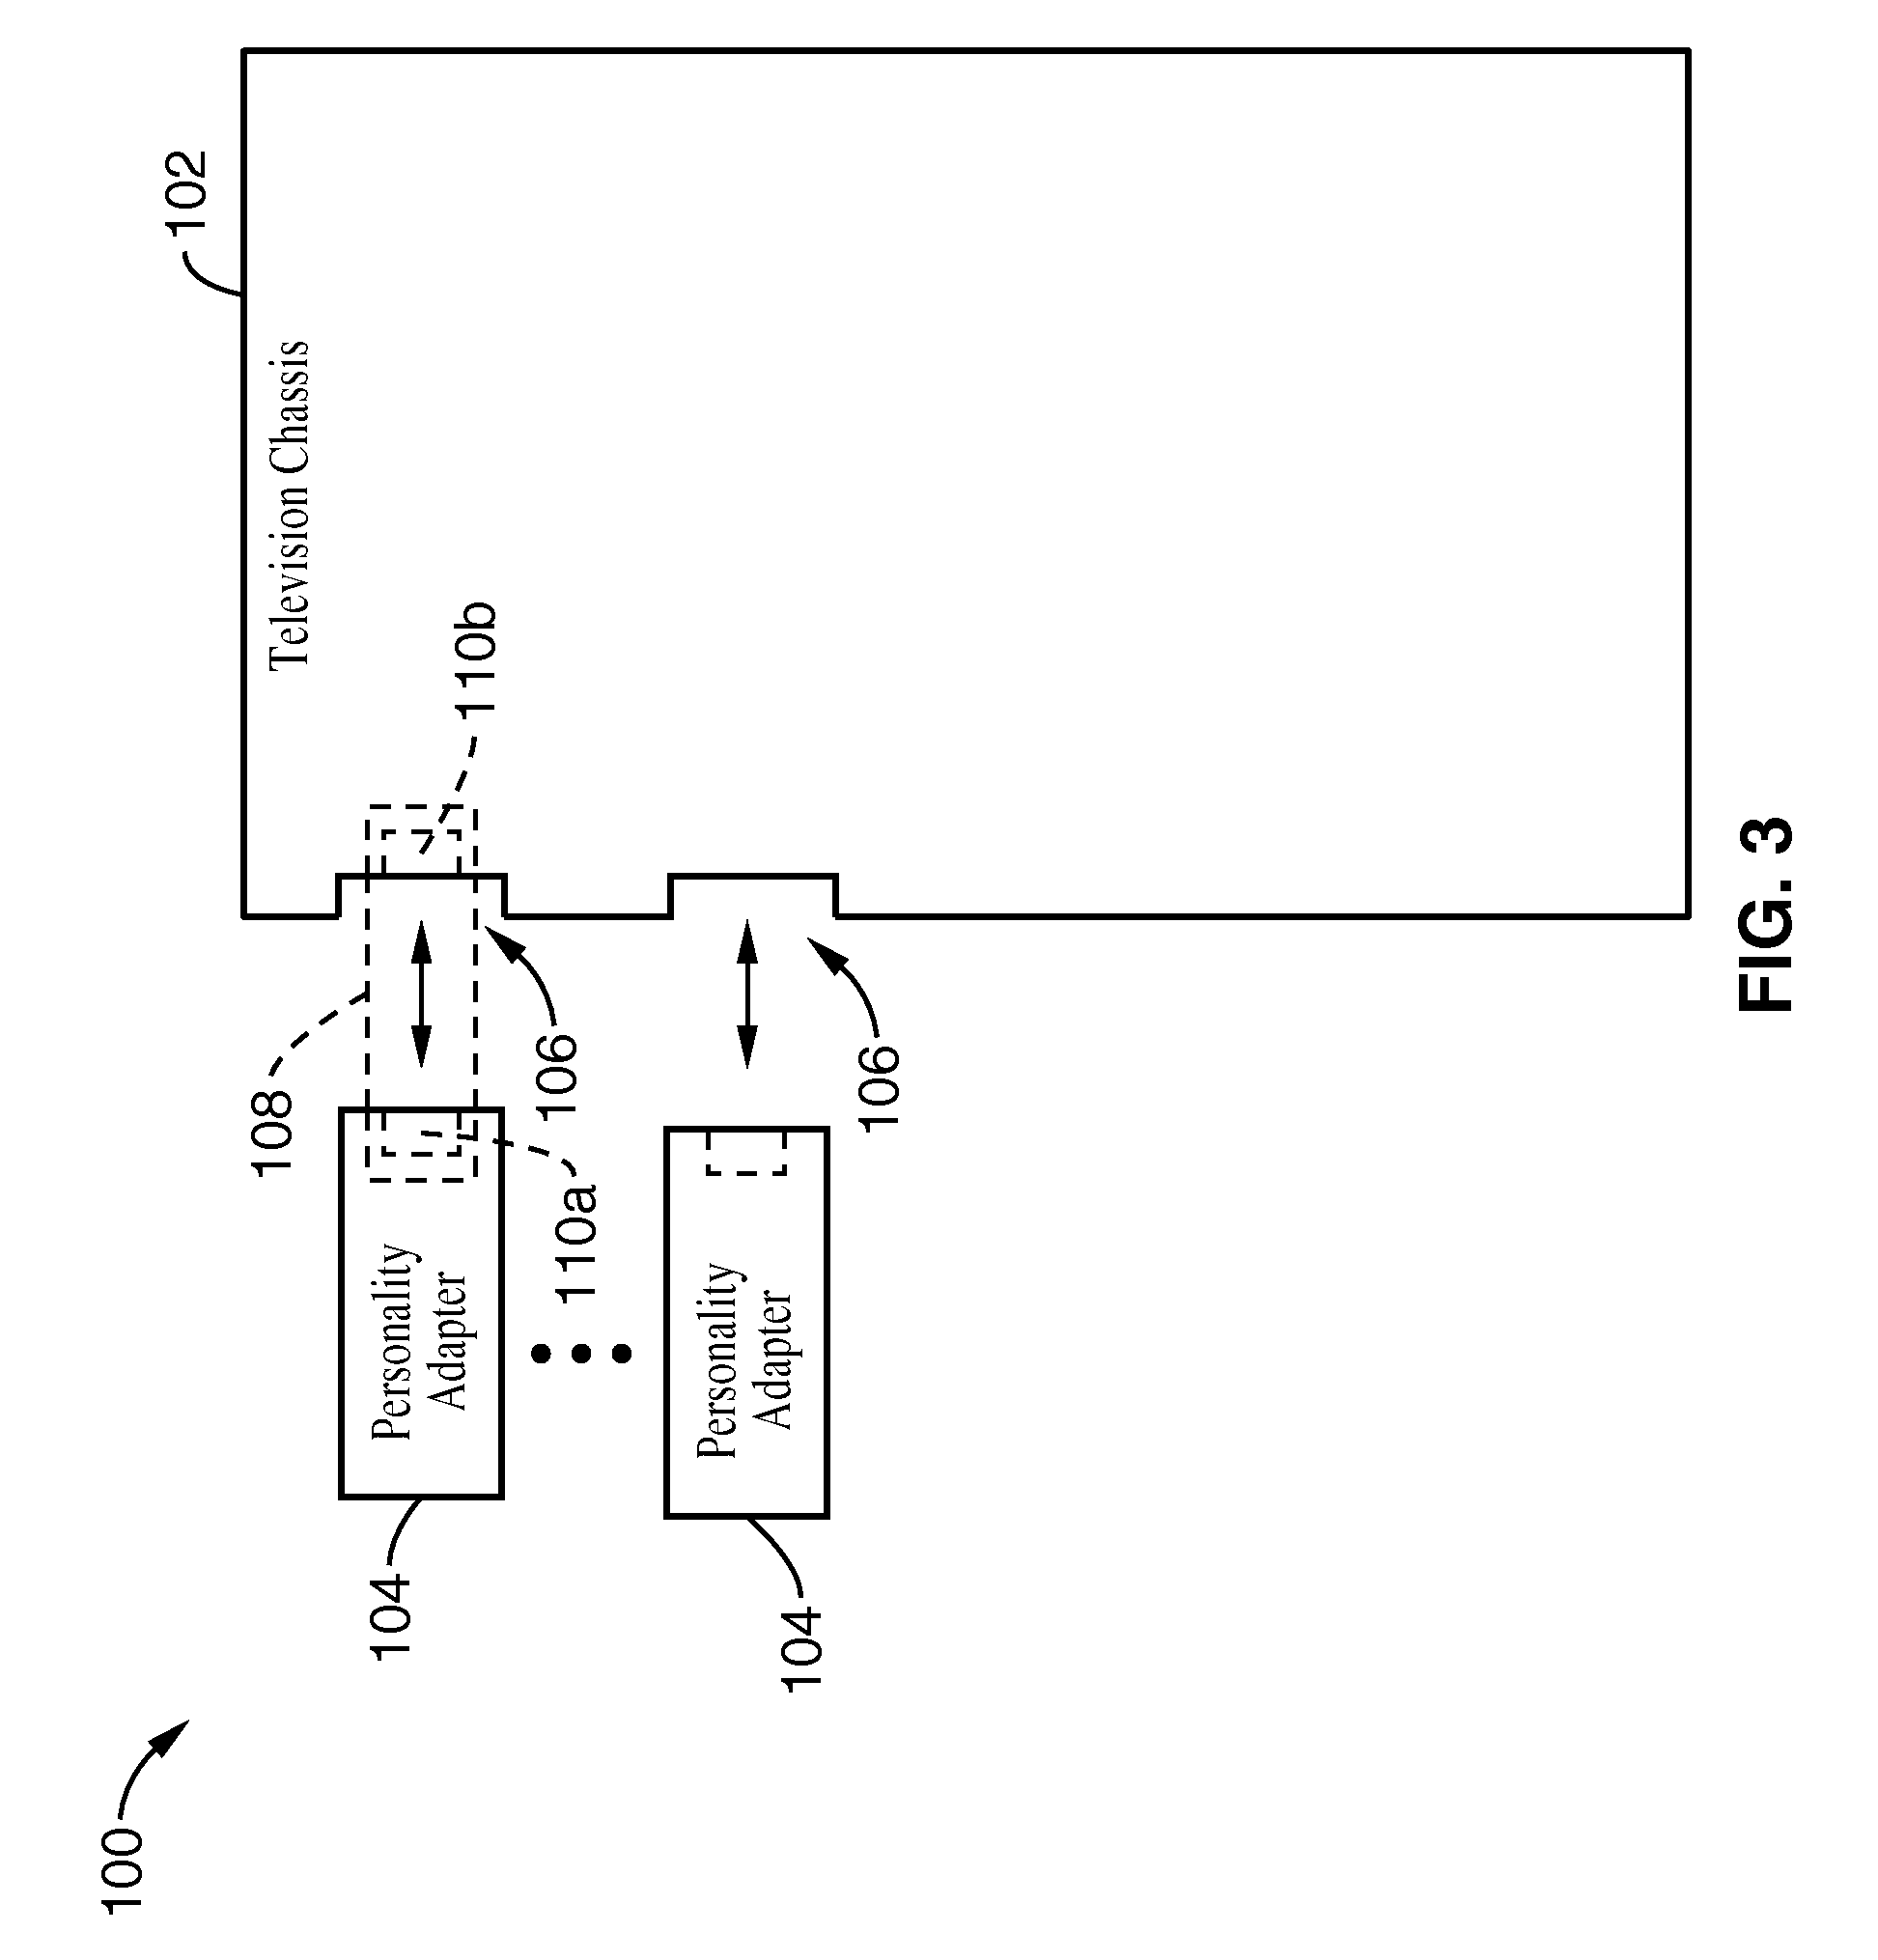 Automatically reconfigurable multimedia system with interchangeable personality adapters